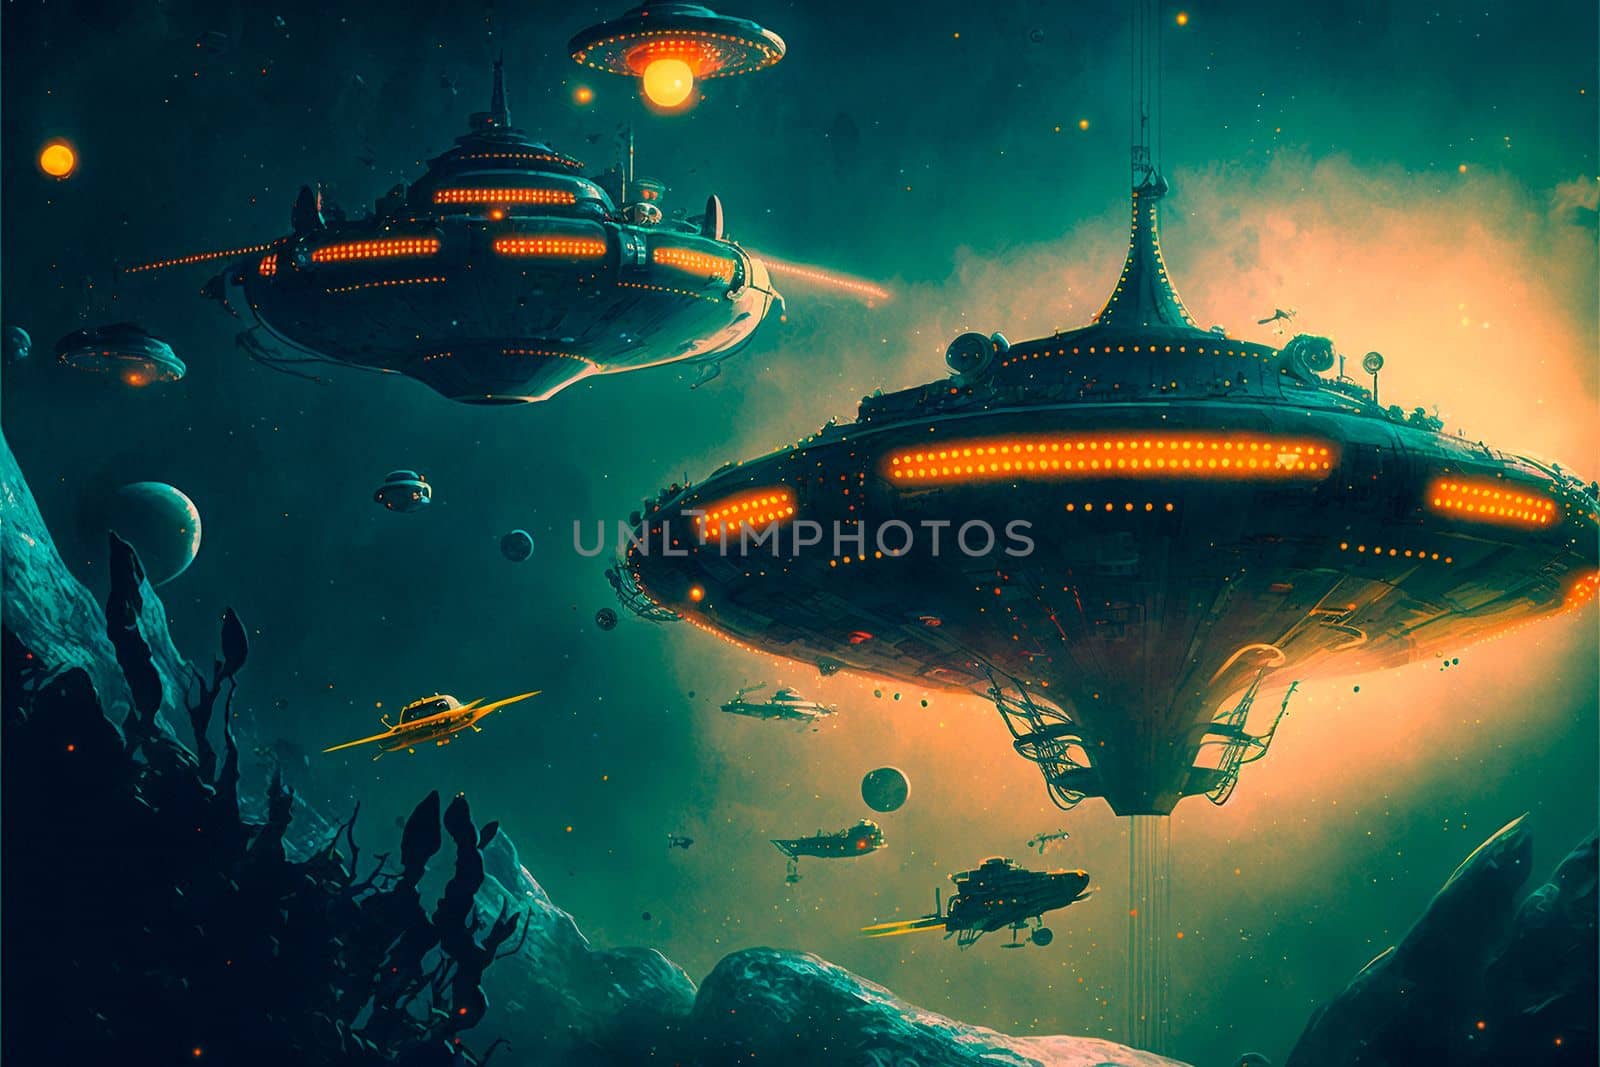 intergalactic spaceships on the background of planets and space by NeuroSky